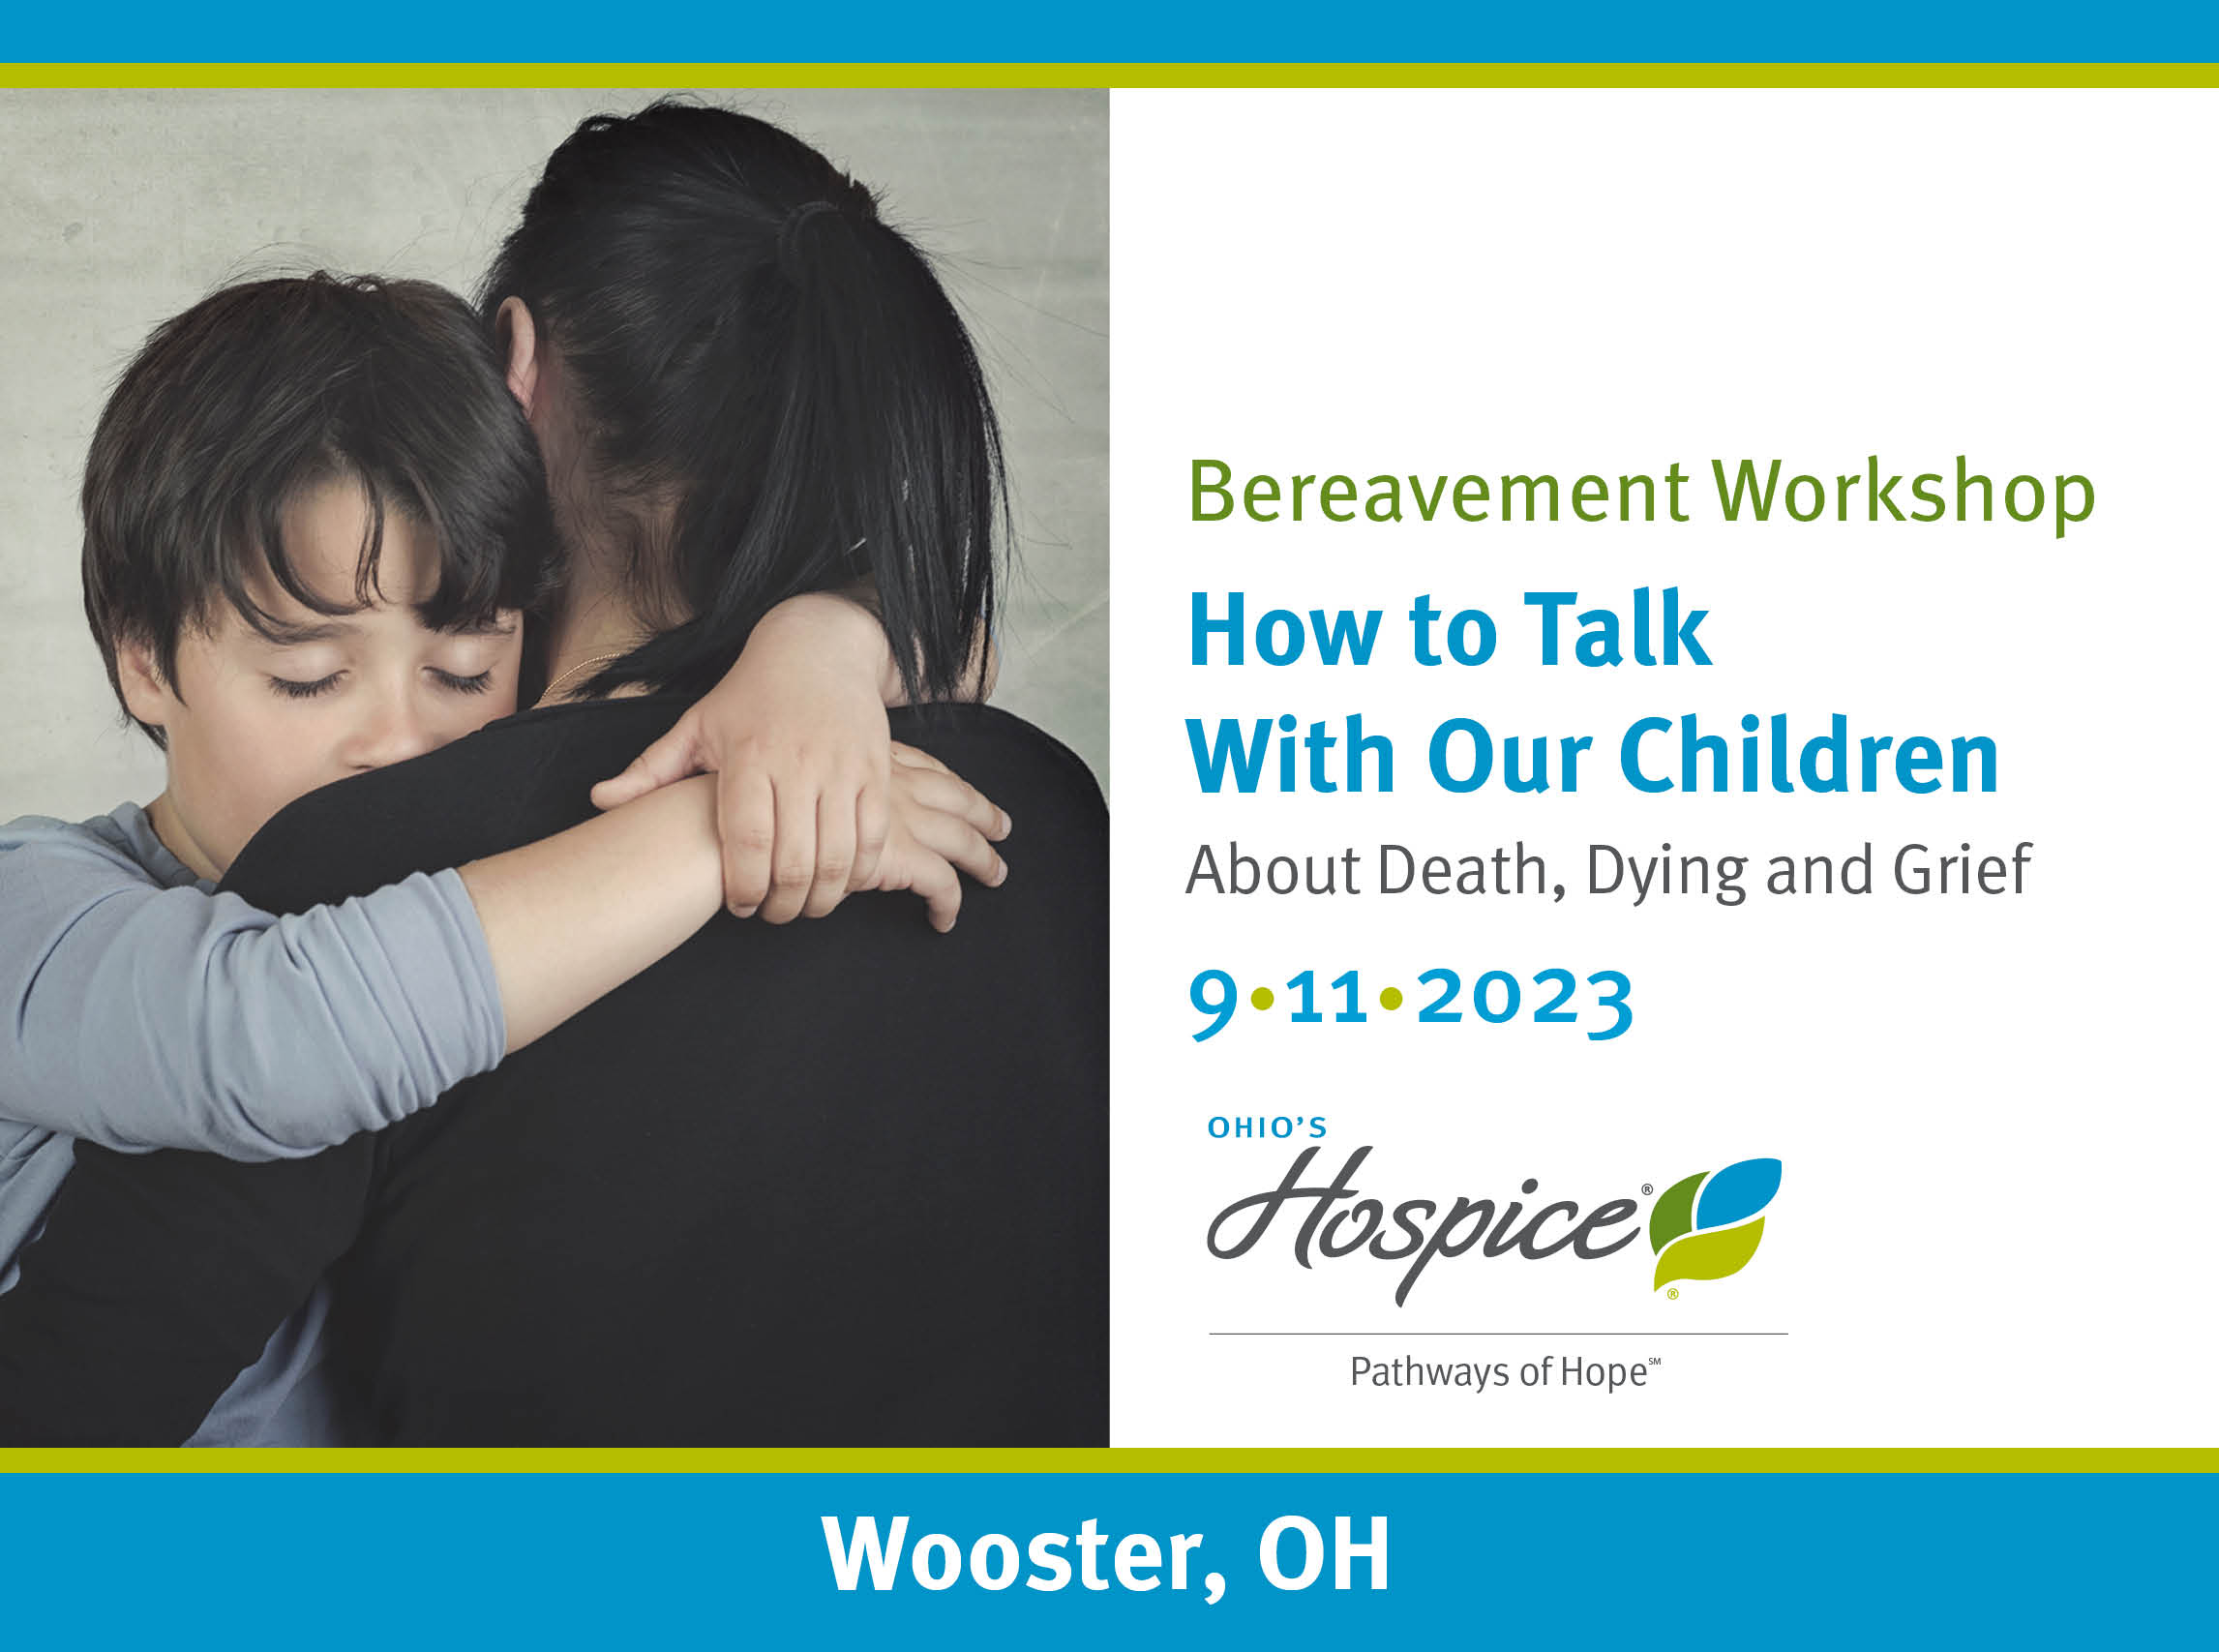 Bereavement Workshop. How to Talk With Our Children About Death, Dying and Grief. 9.11.2023. Ohio's Hospice Pathways of Hope. Wooster, OH